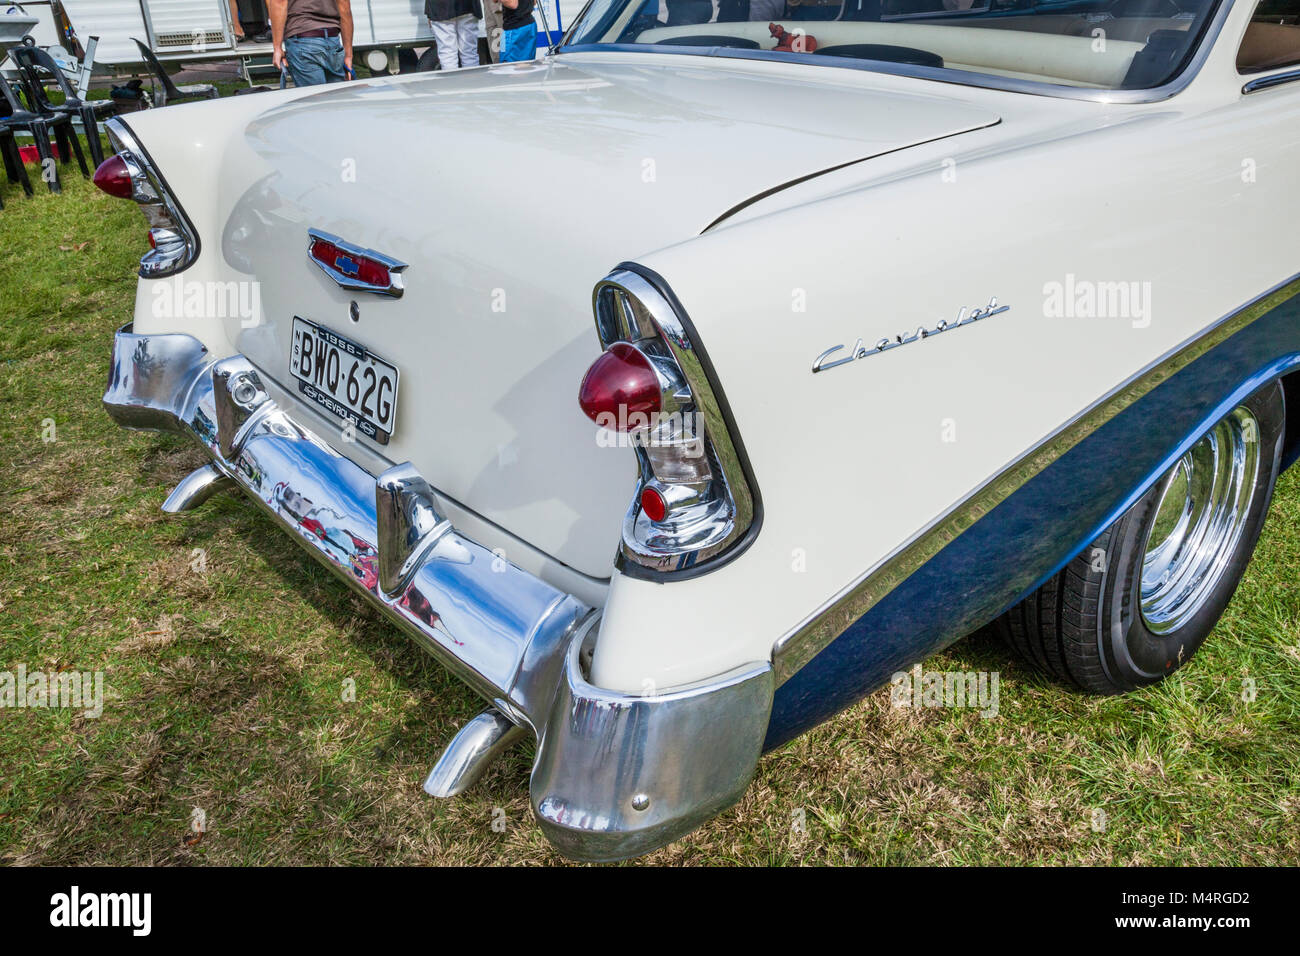 Australia, New South Wales, Central Coast, The Entrance, the elegant rear of a 1956 Chevrolet 210 Sedan exhibited during the Central Coast Historic Ca Stock Photo